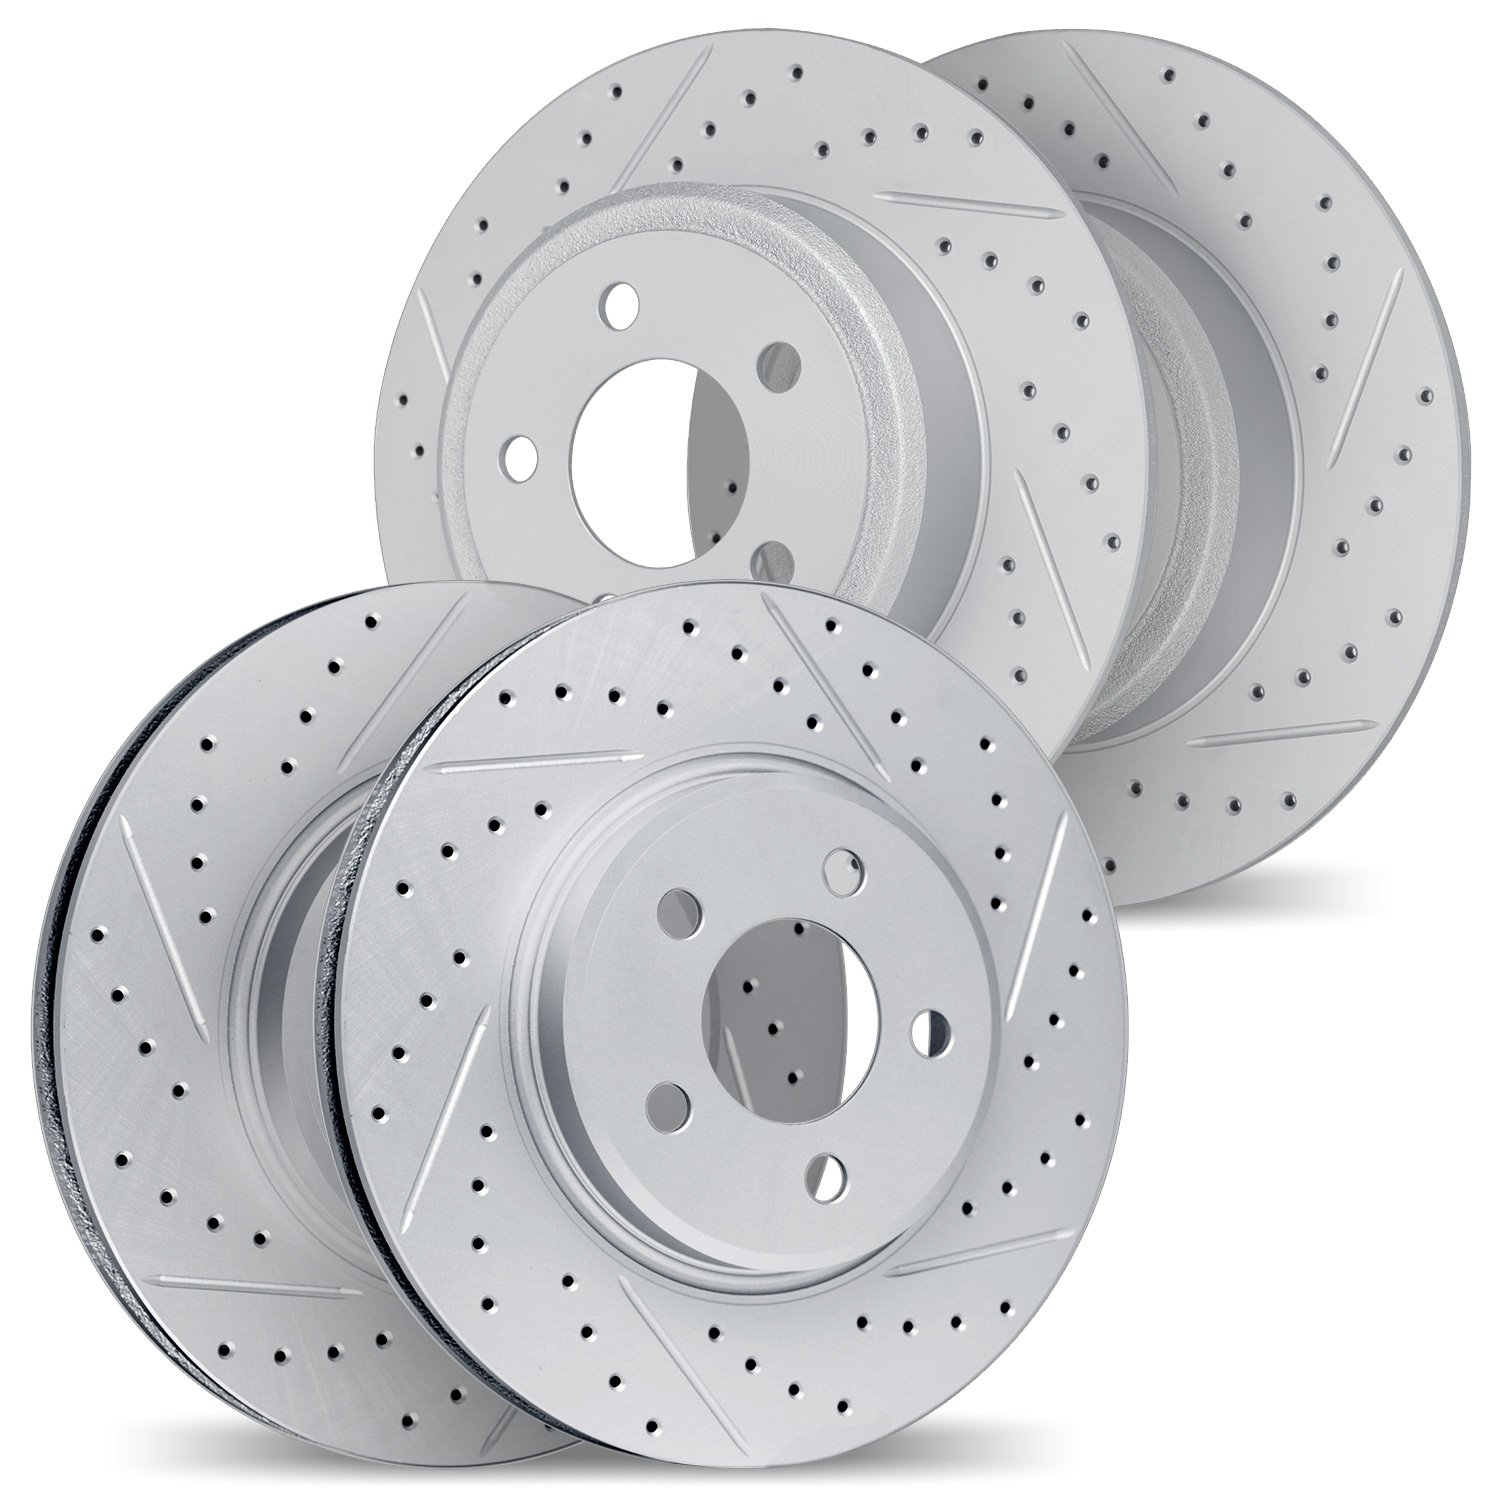 2004-03018 Geoperformance Drilled/Slotted Brake Rotors, Fits Select Kia/Hyundai/Genesis, Position: Front and Rear